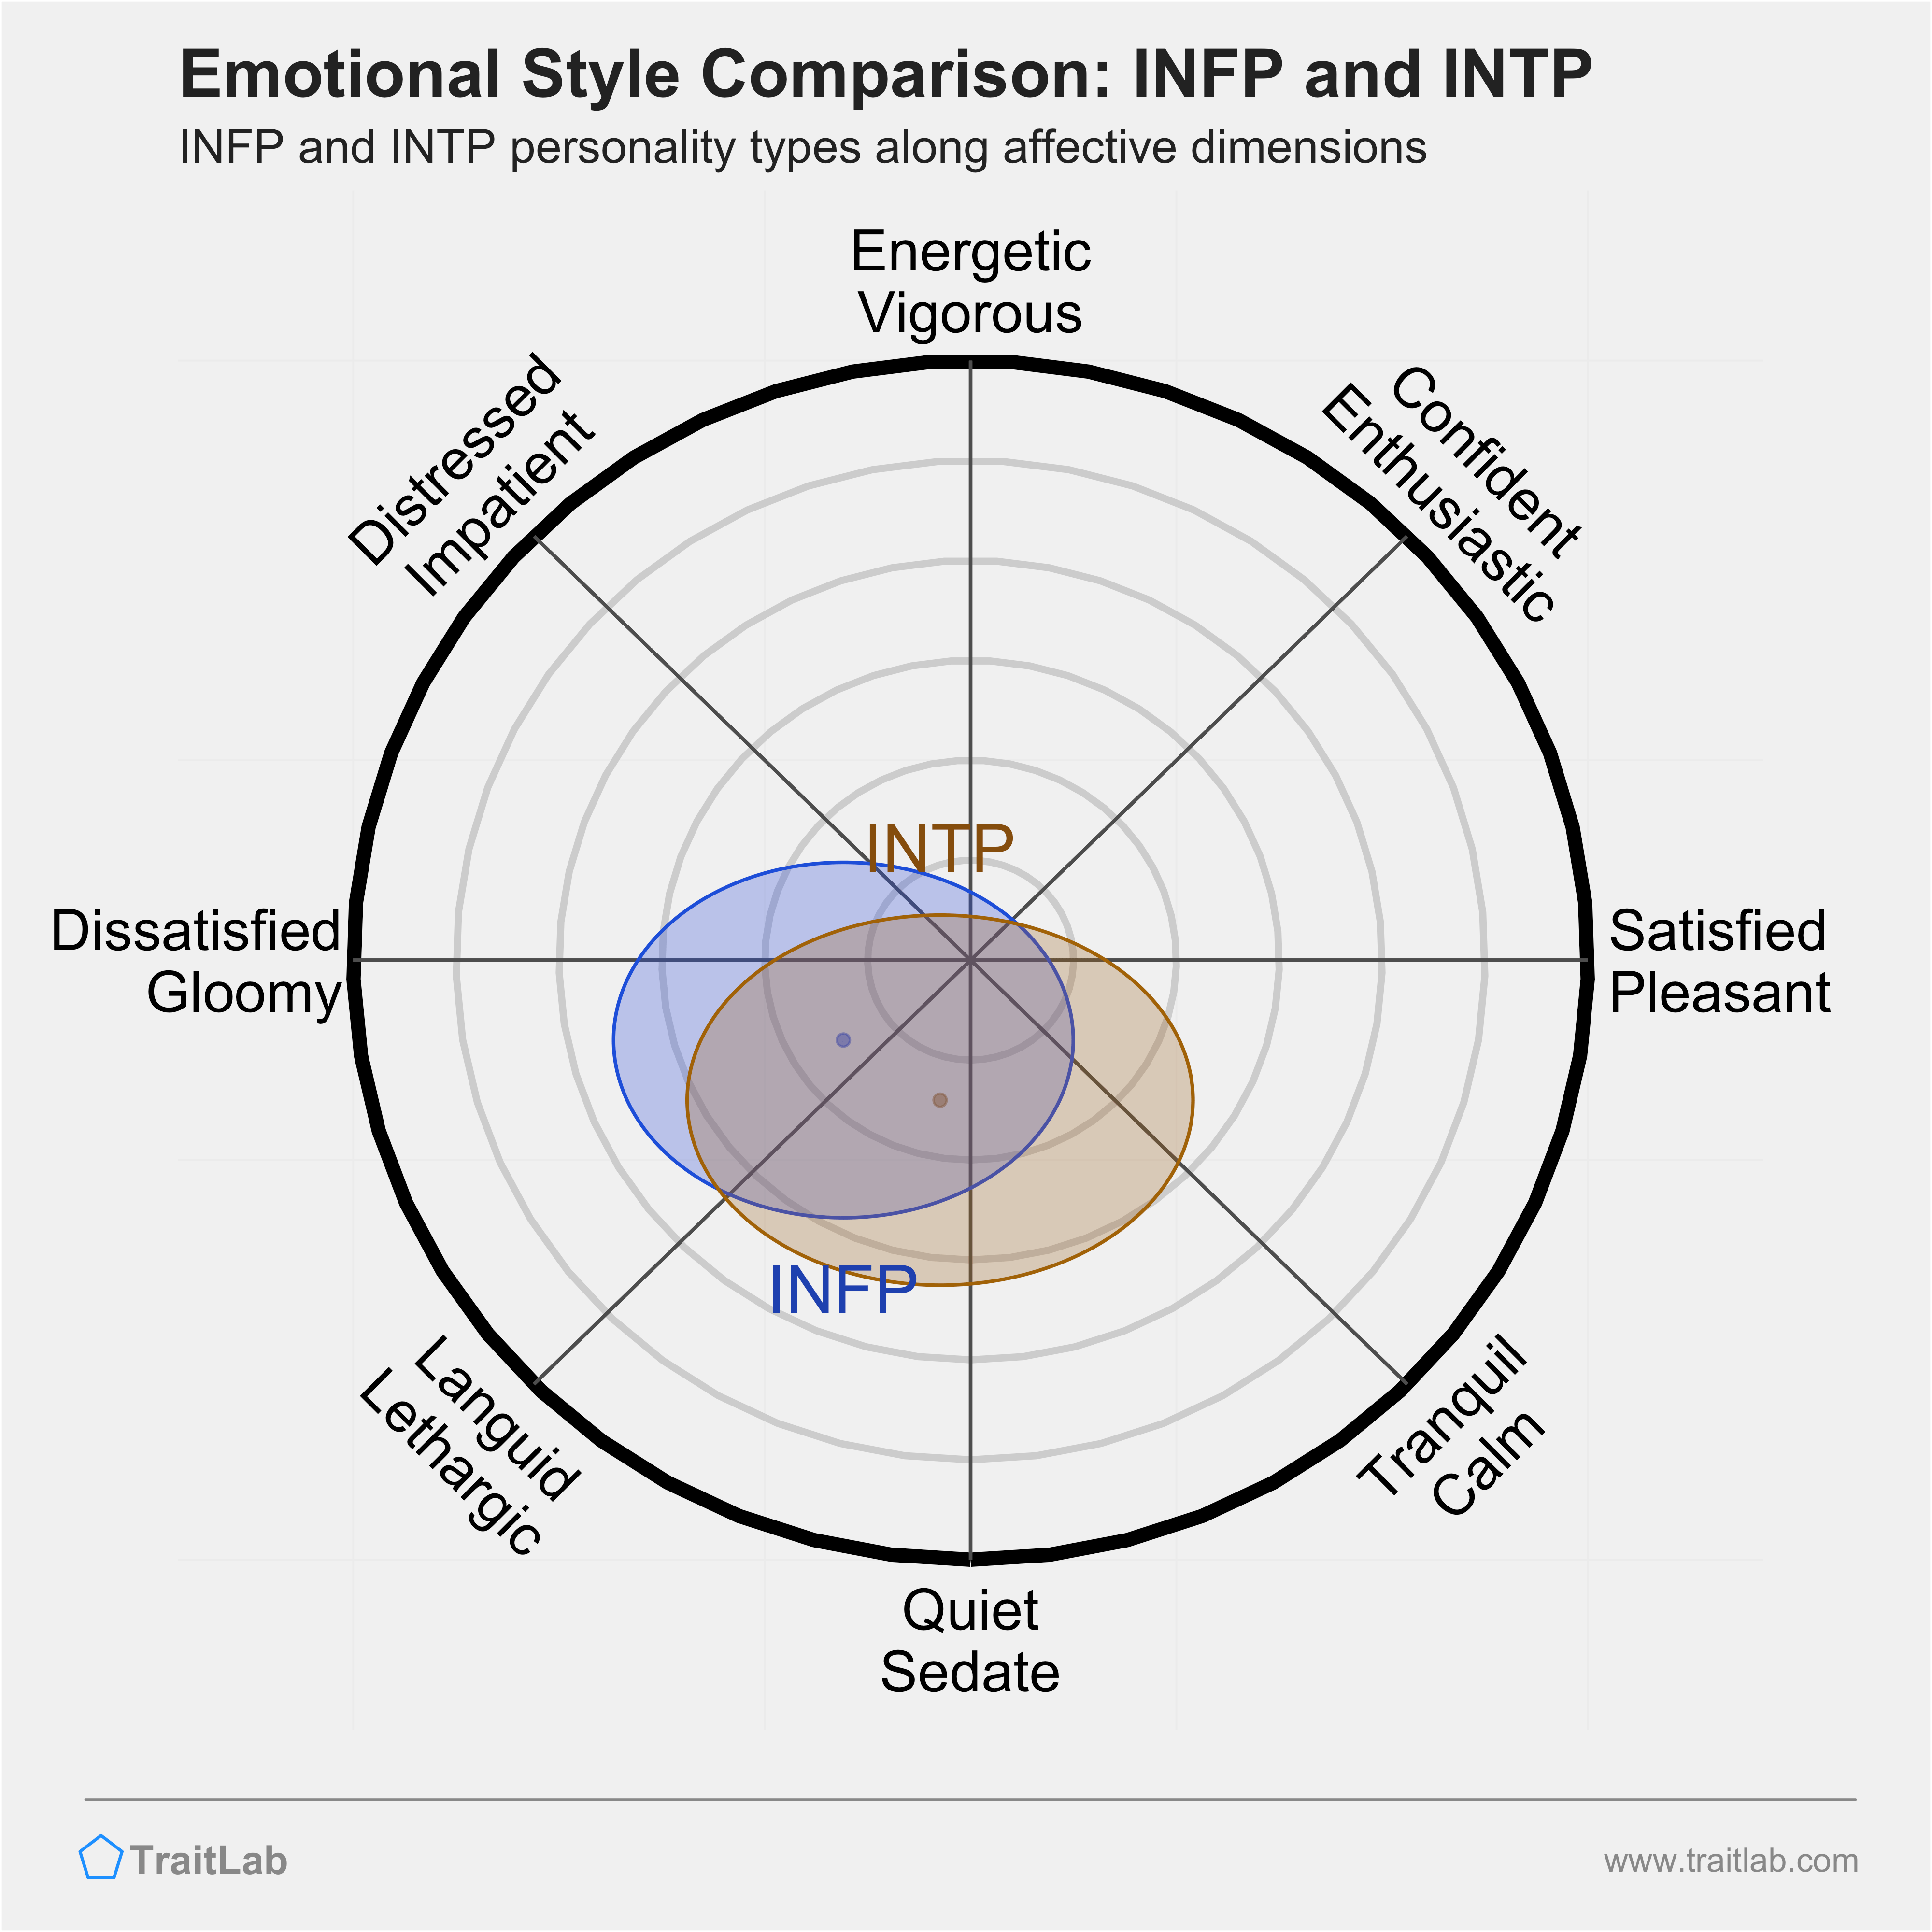 INFP and INTP comparison across emotional (affective) dimensions